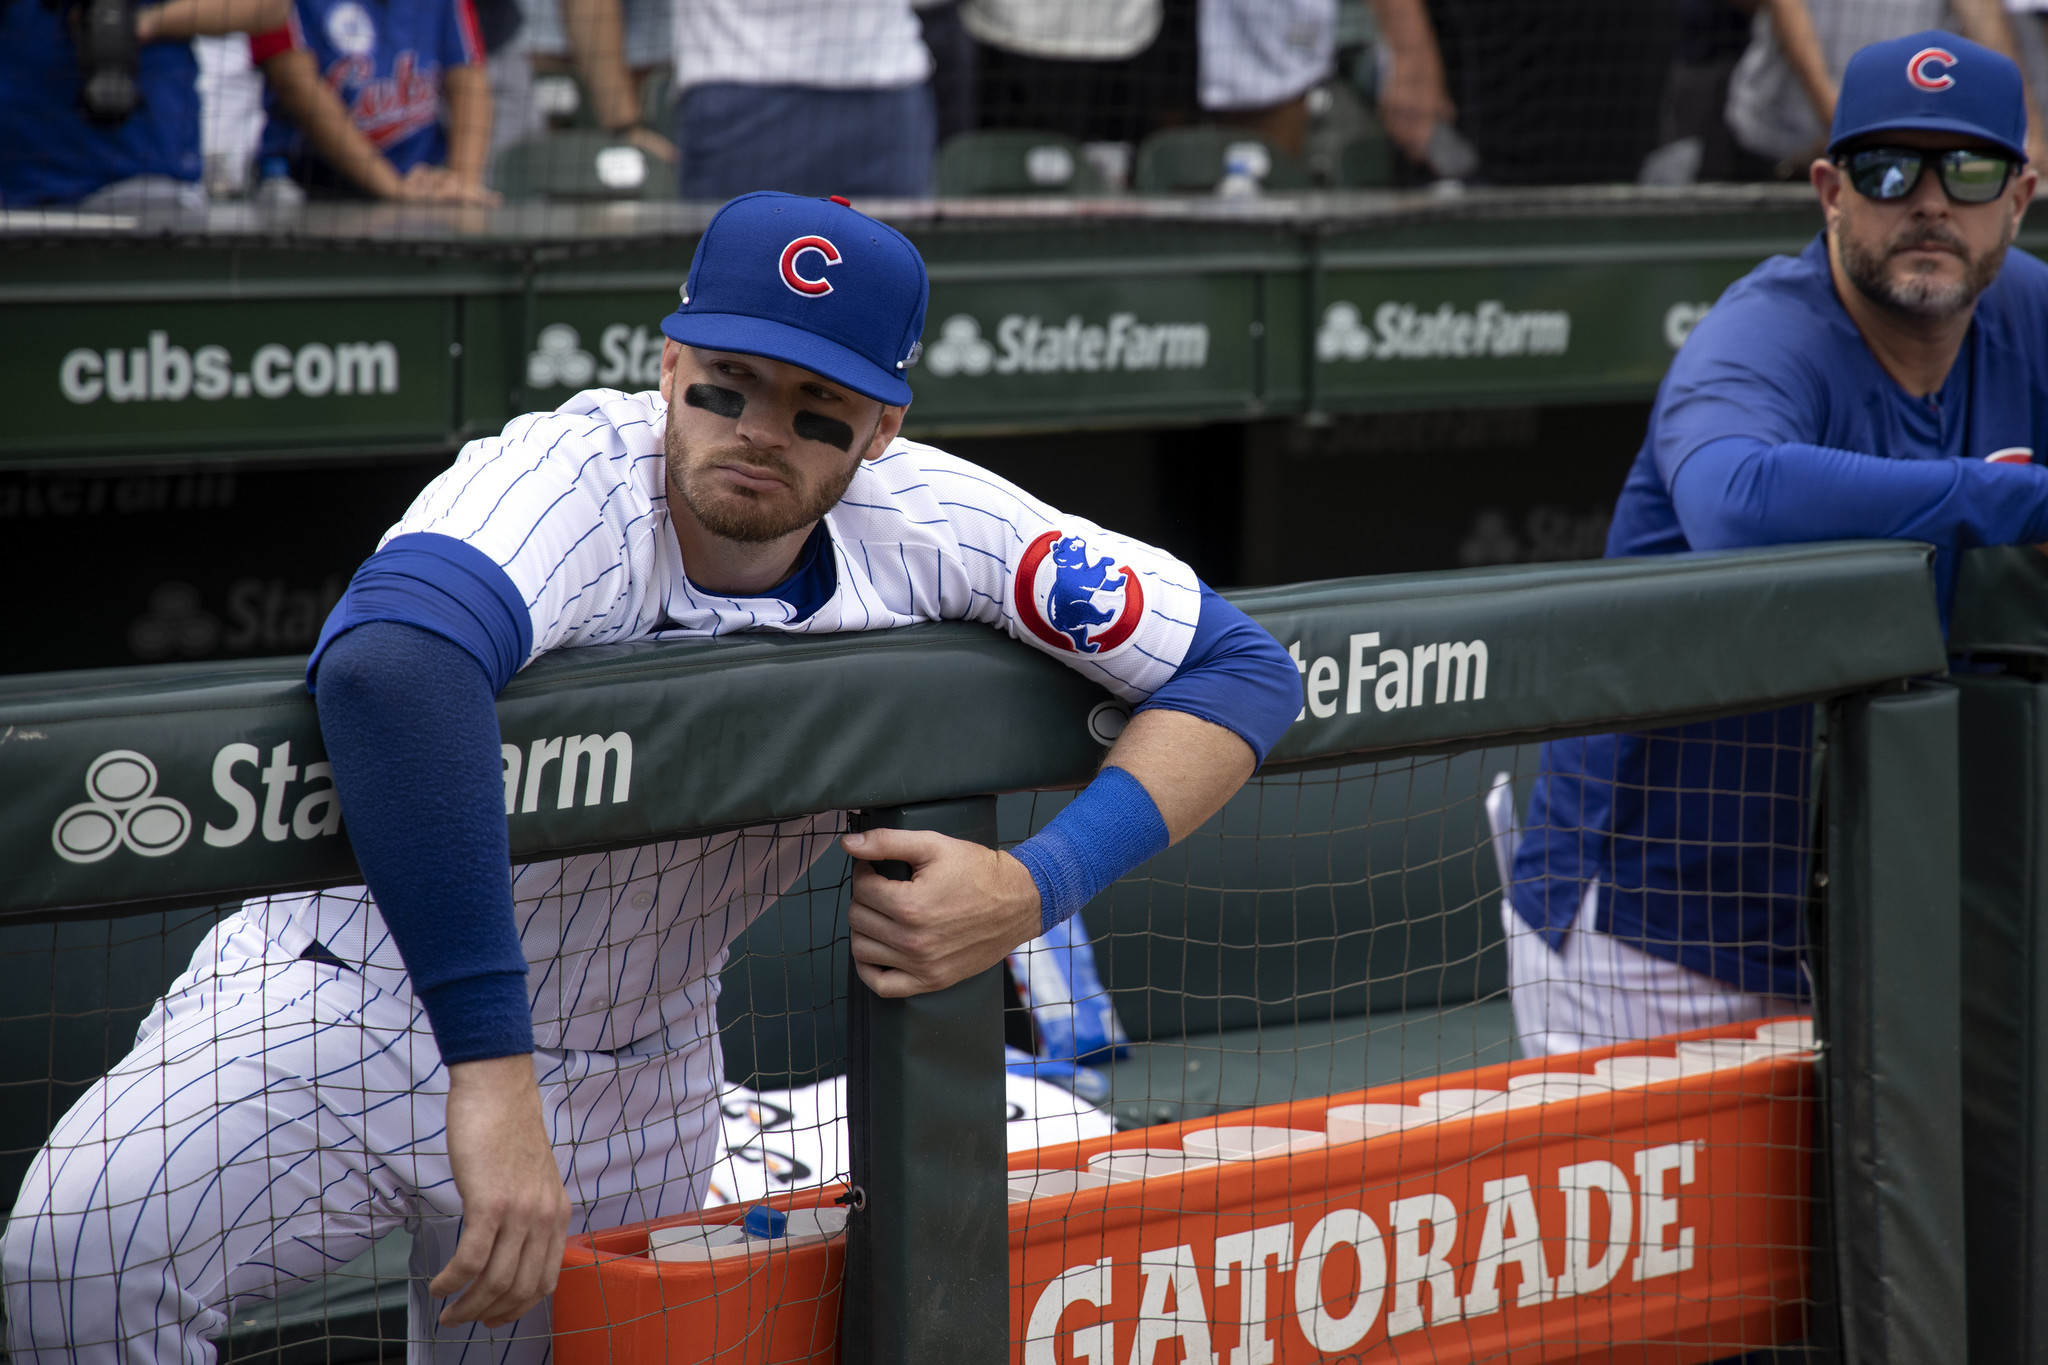 Cubs lose Wisdom, don masks and beat Pirates